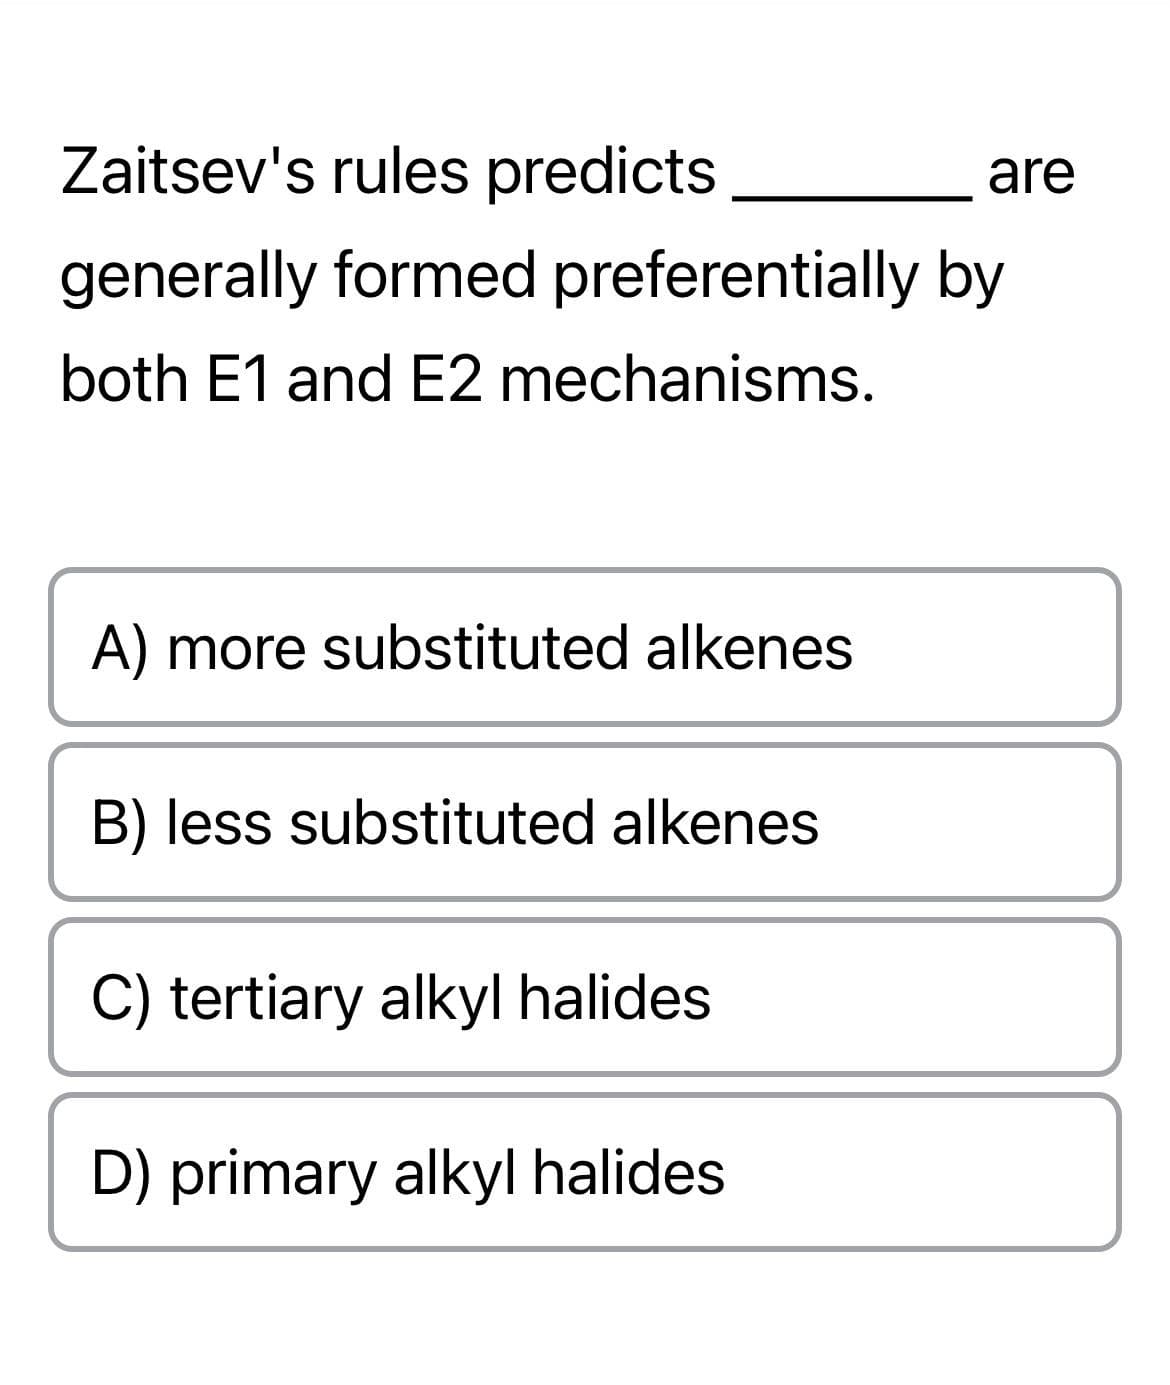 Zaitsev's rules predicts
generally formed preferentially by
both E1 and E2 mechanisms.
A) more substituted alkenes
B) less substituted alkenes
C) tertiary alkyl halides
D) primary alkyl halides
are